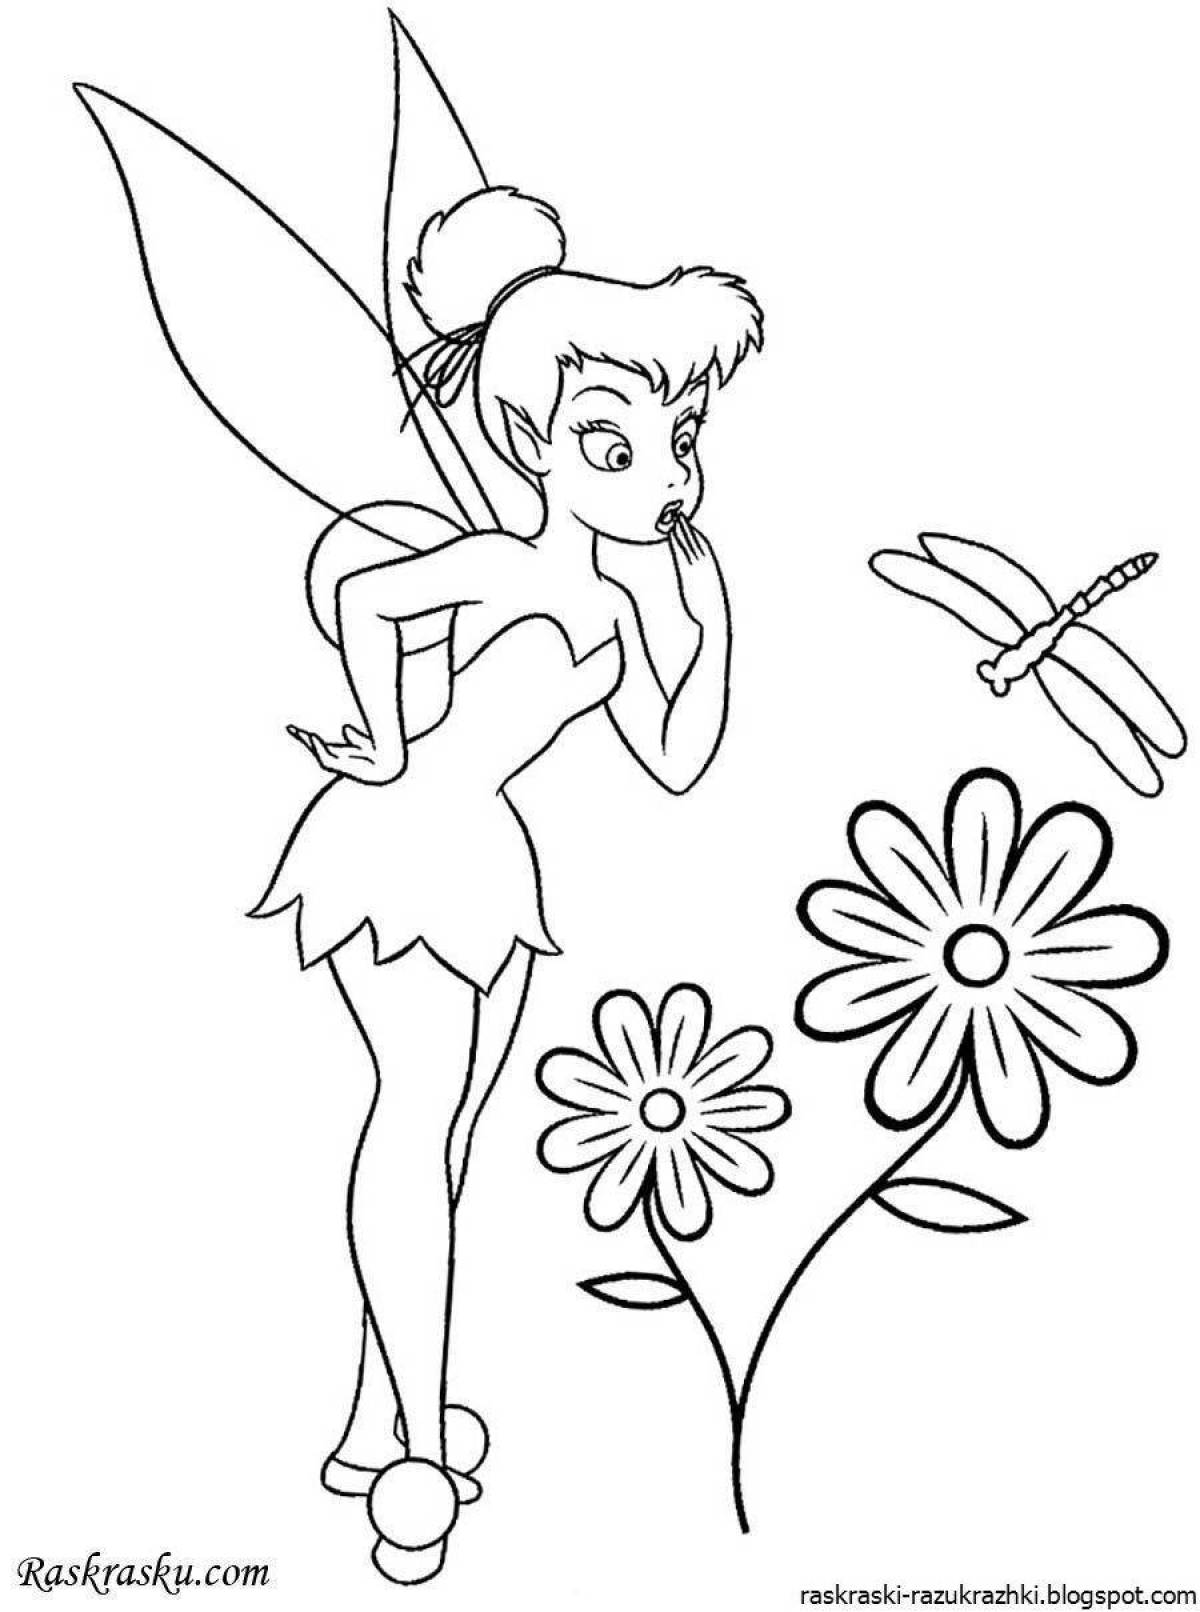 Incredible fairy coloring pages for kids 5-6 years old